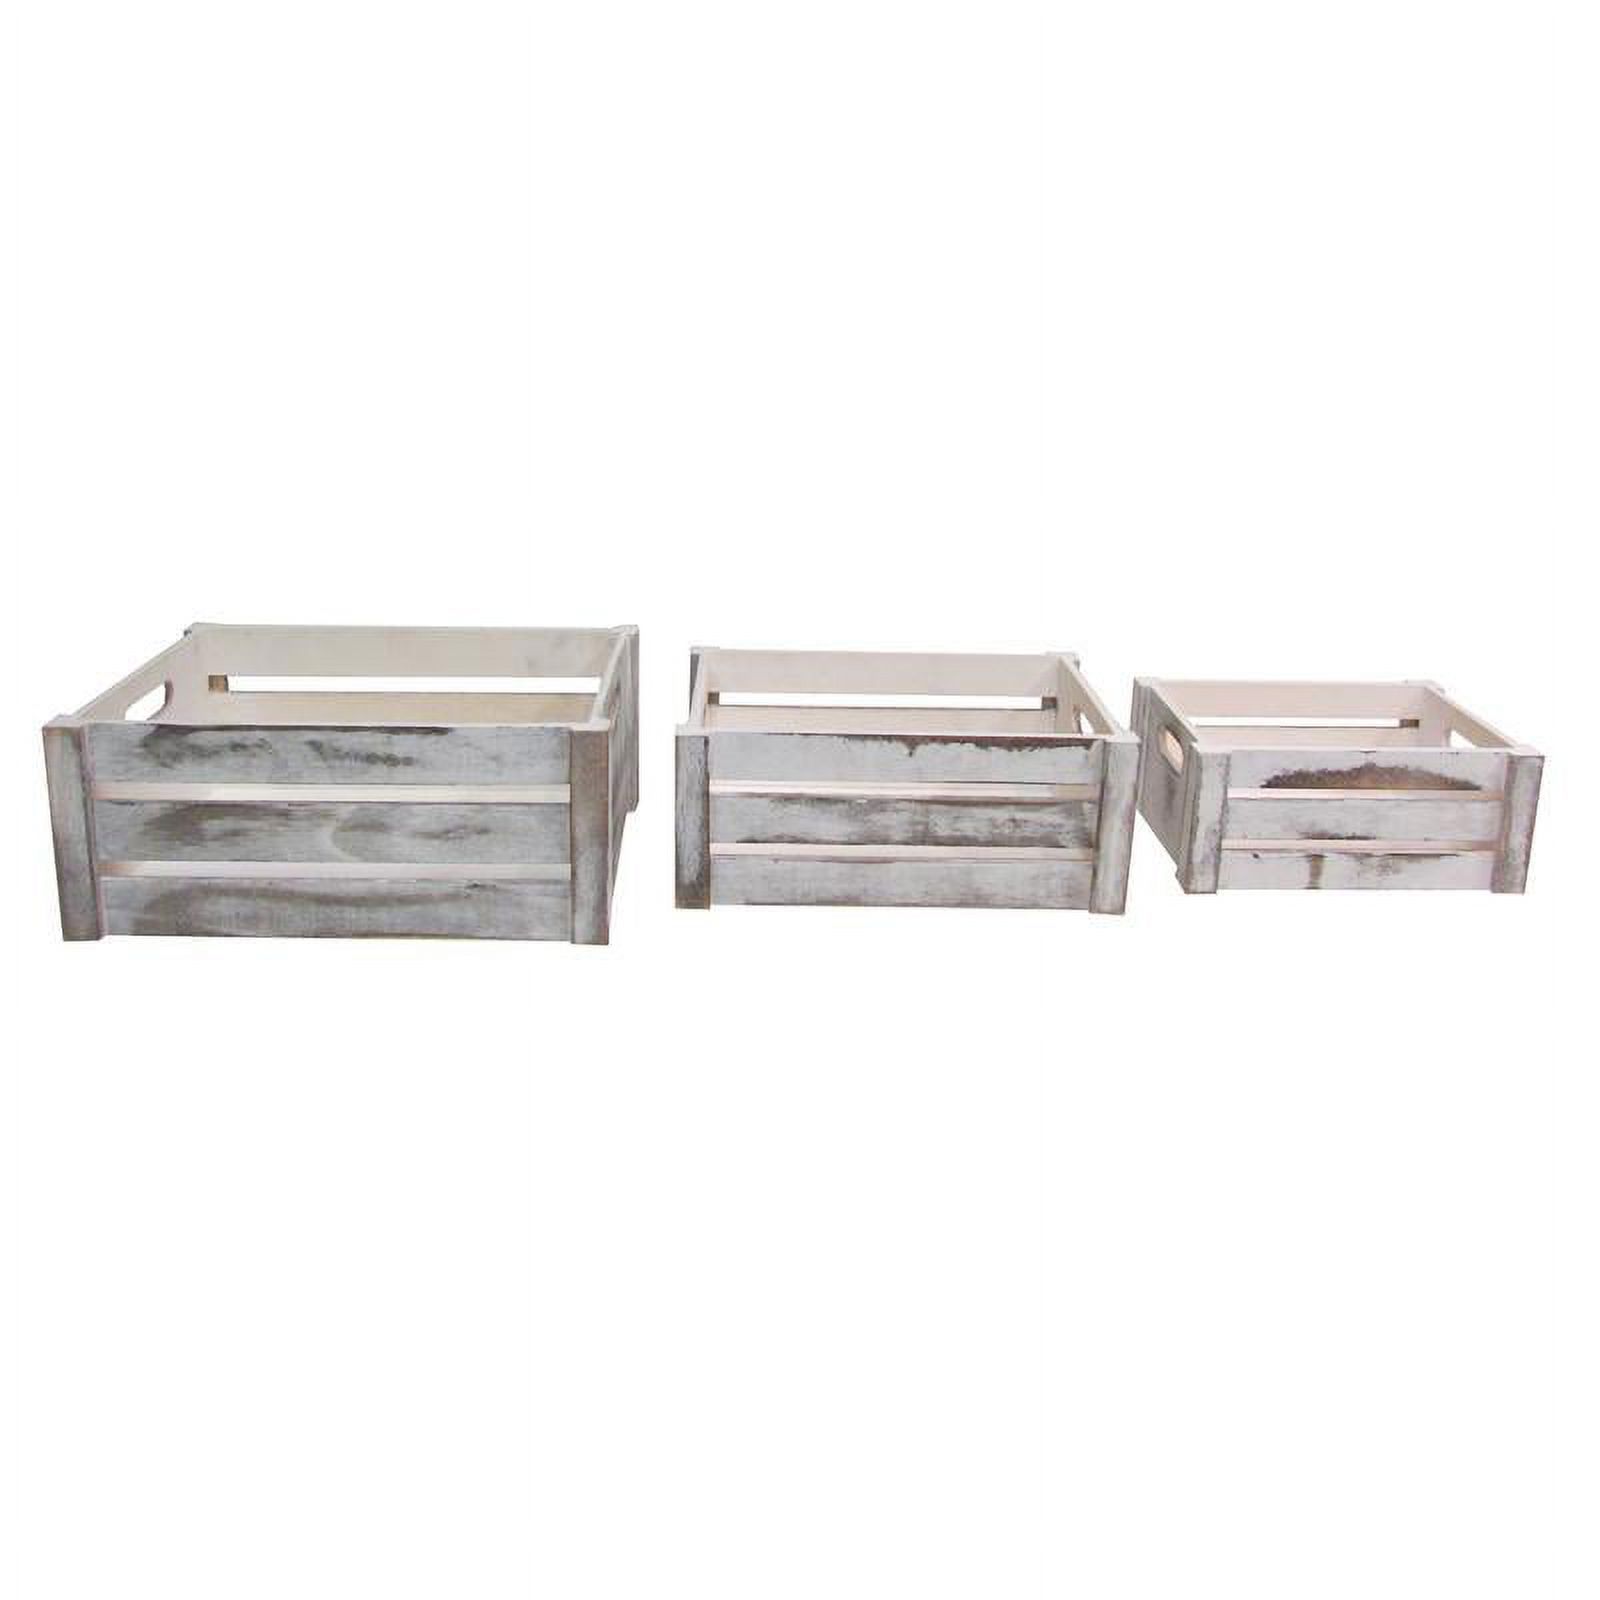 Admired by Nature 0.119 Gallon Wood Storage Crates, Rustic White, 3 Count - image 2 of 6